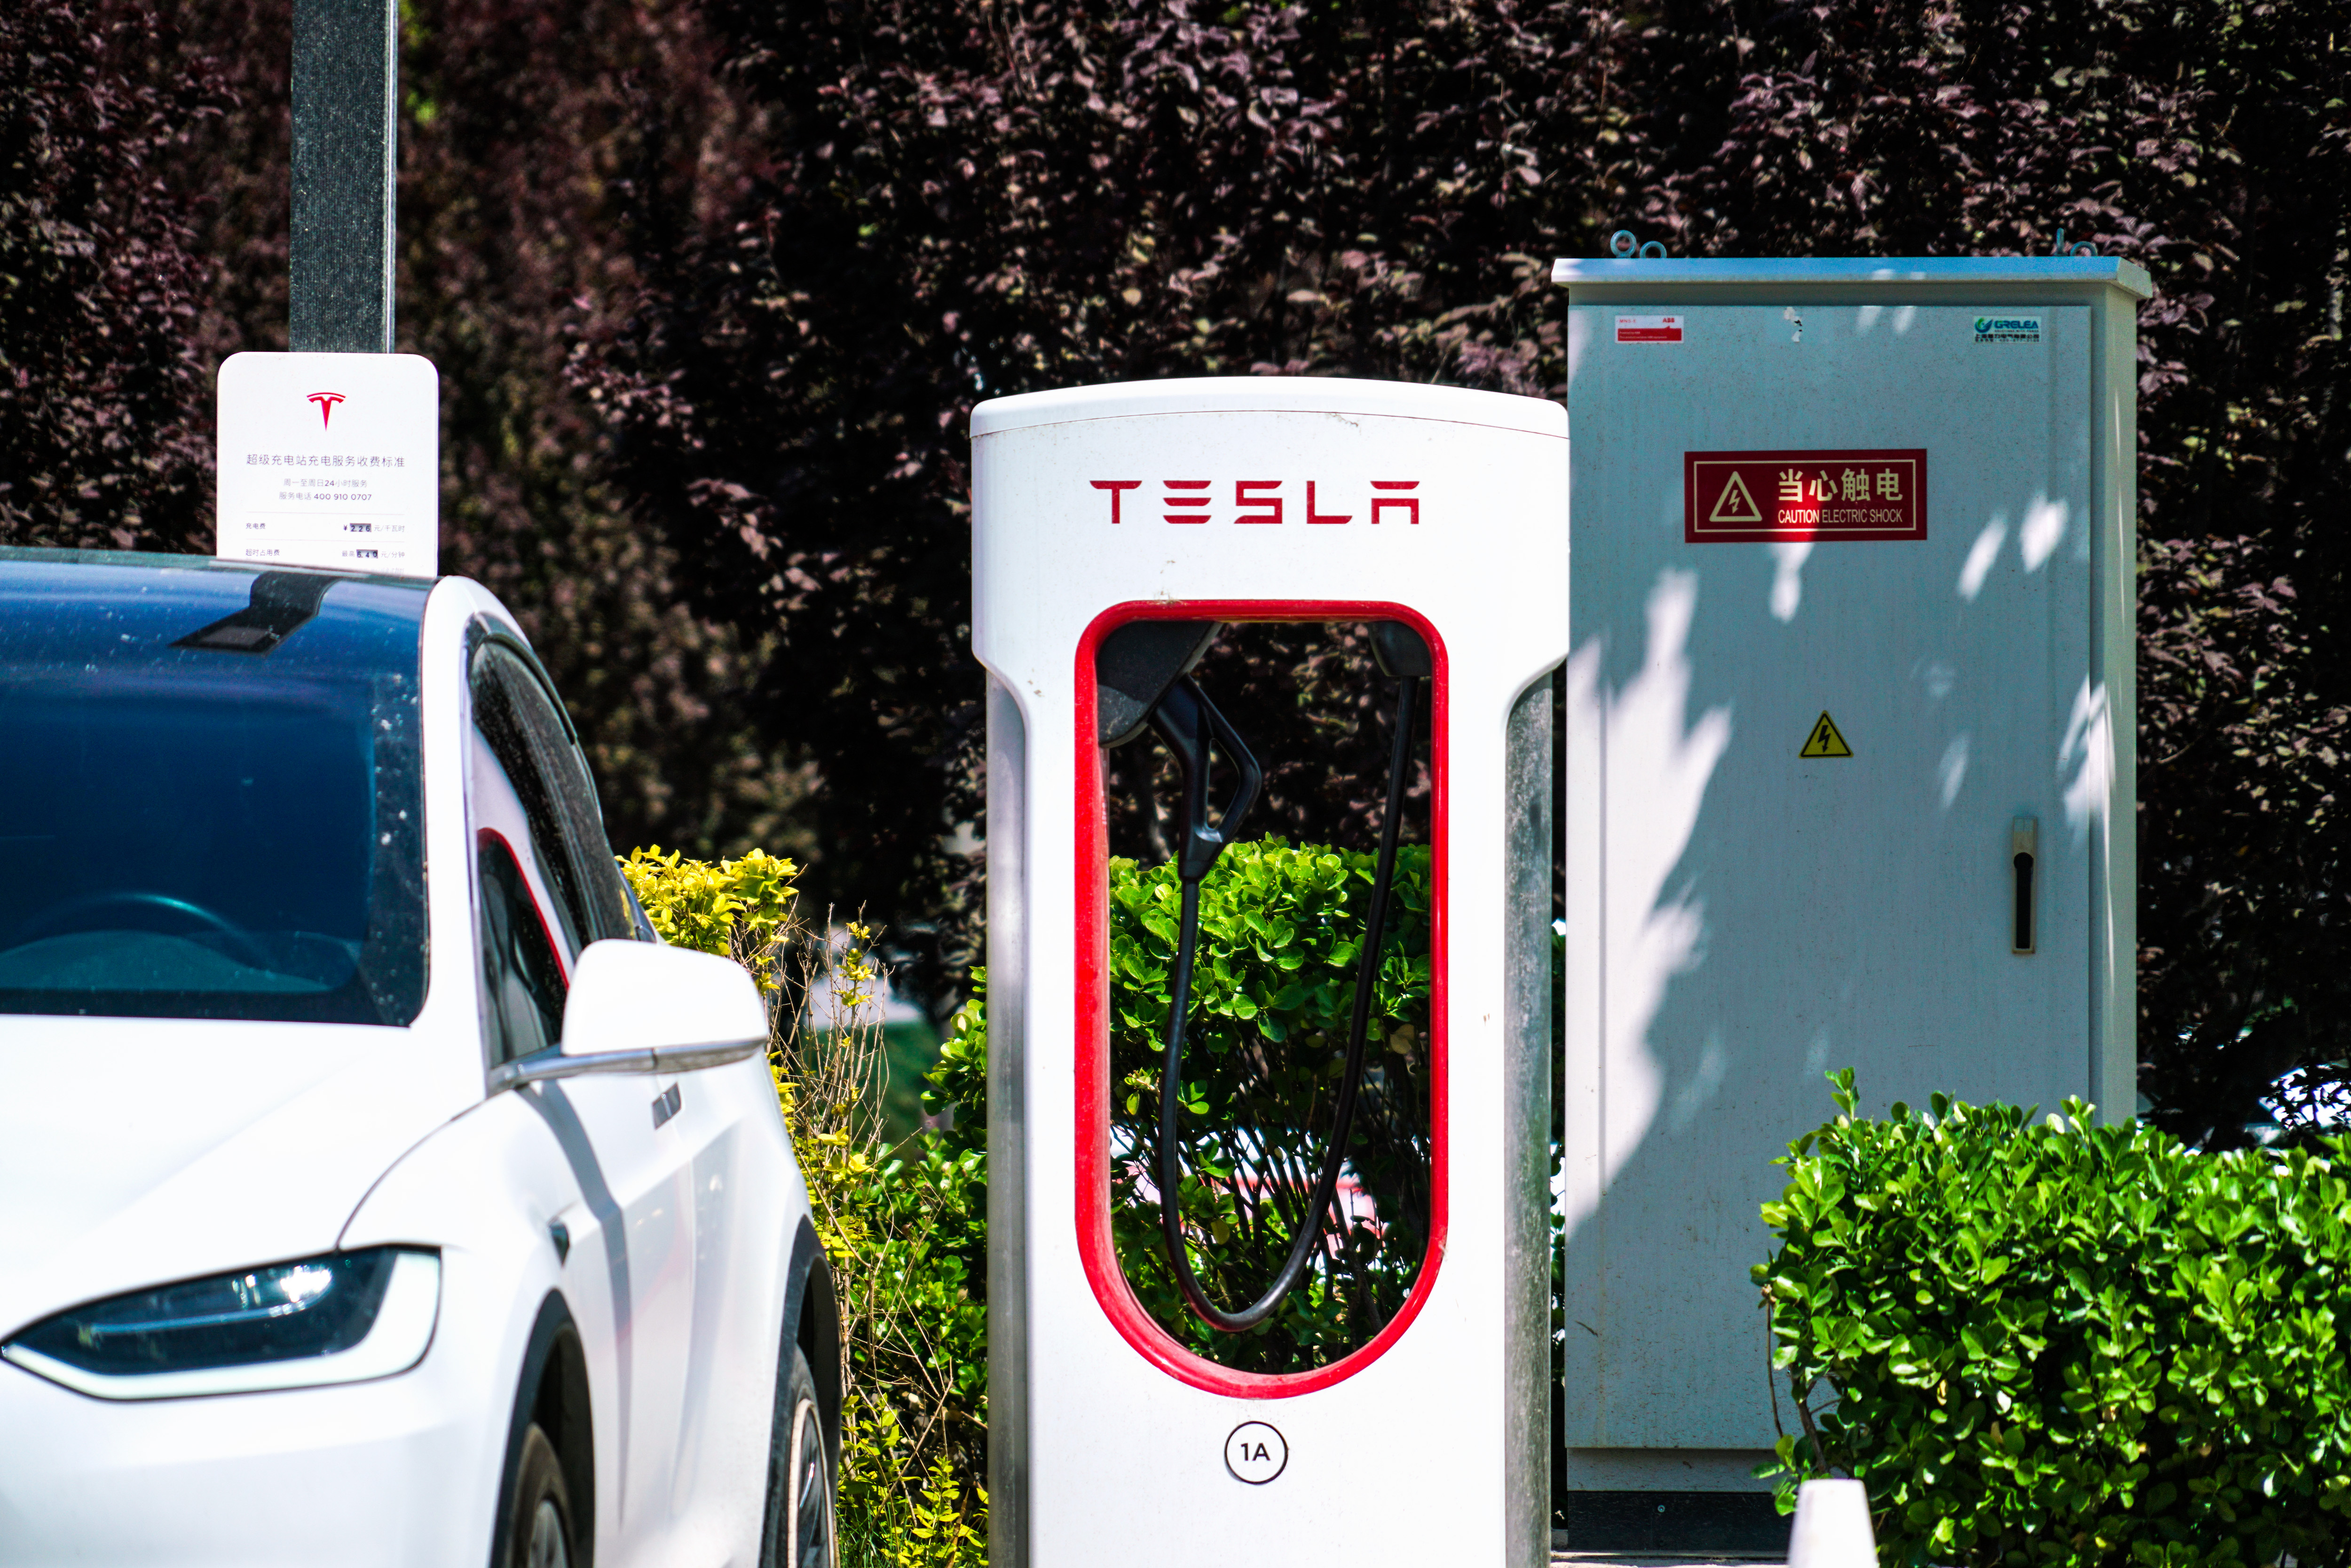 Can non-Tesla electric cars use Tesla EV chargers?